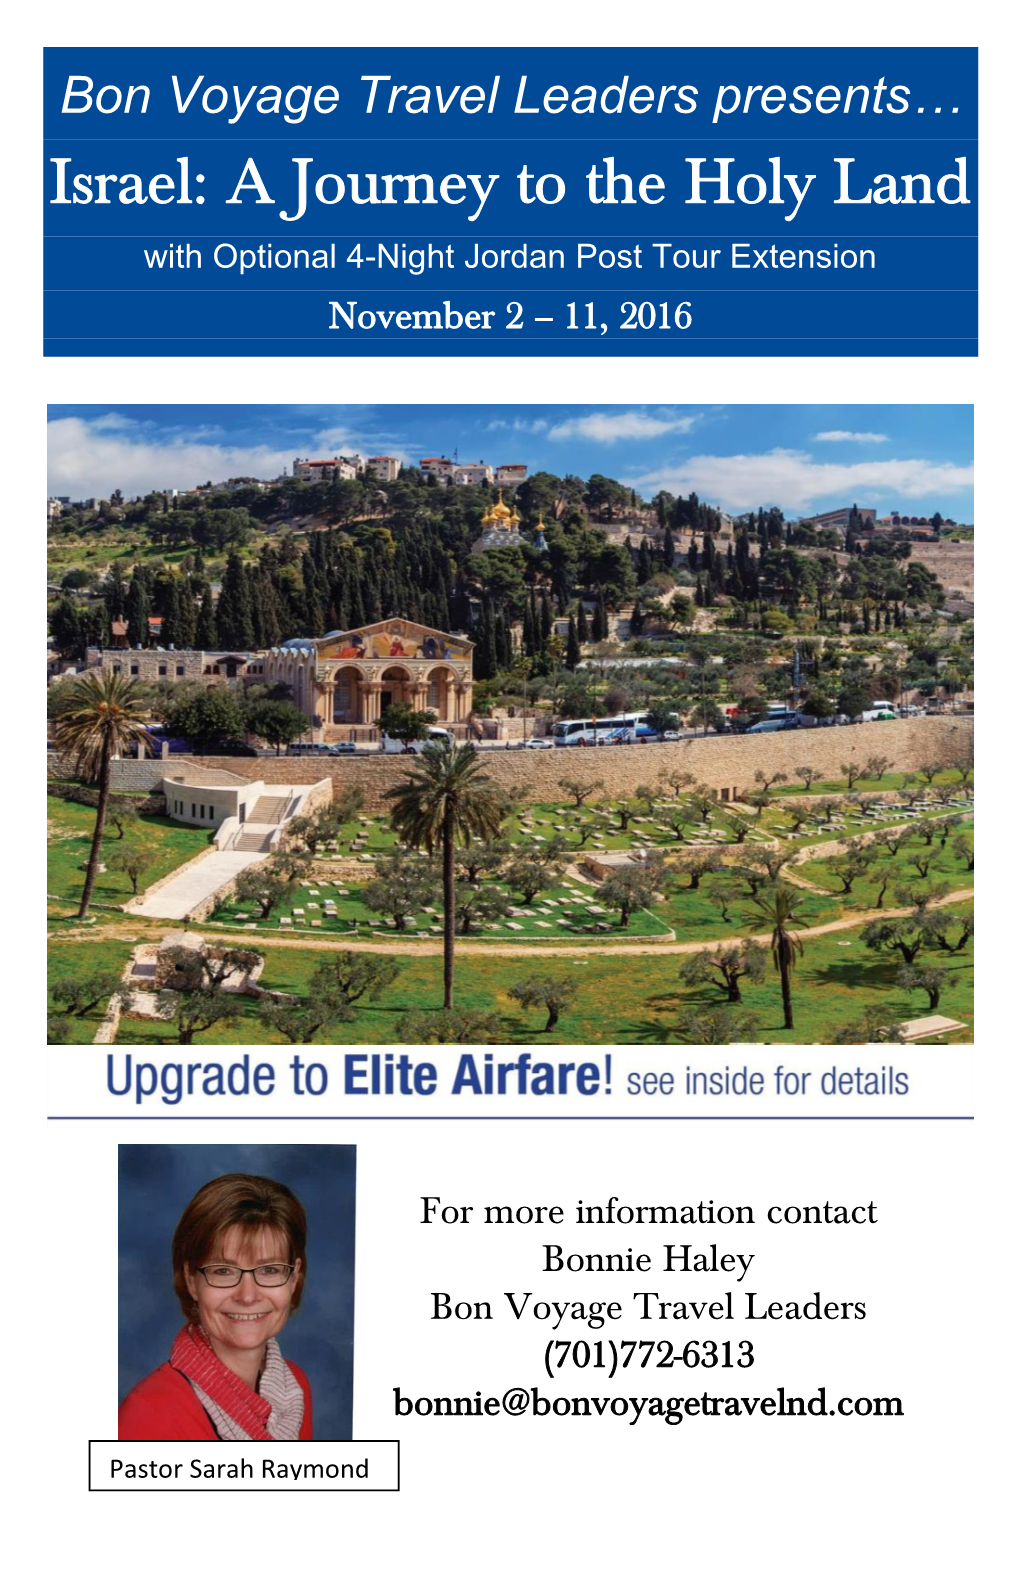 Israel: a Journey to the Holy Land with Optional 4-Night Jordan Post Tour Extension November 2 – 11, 2016